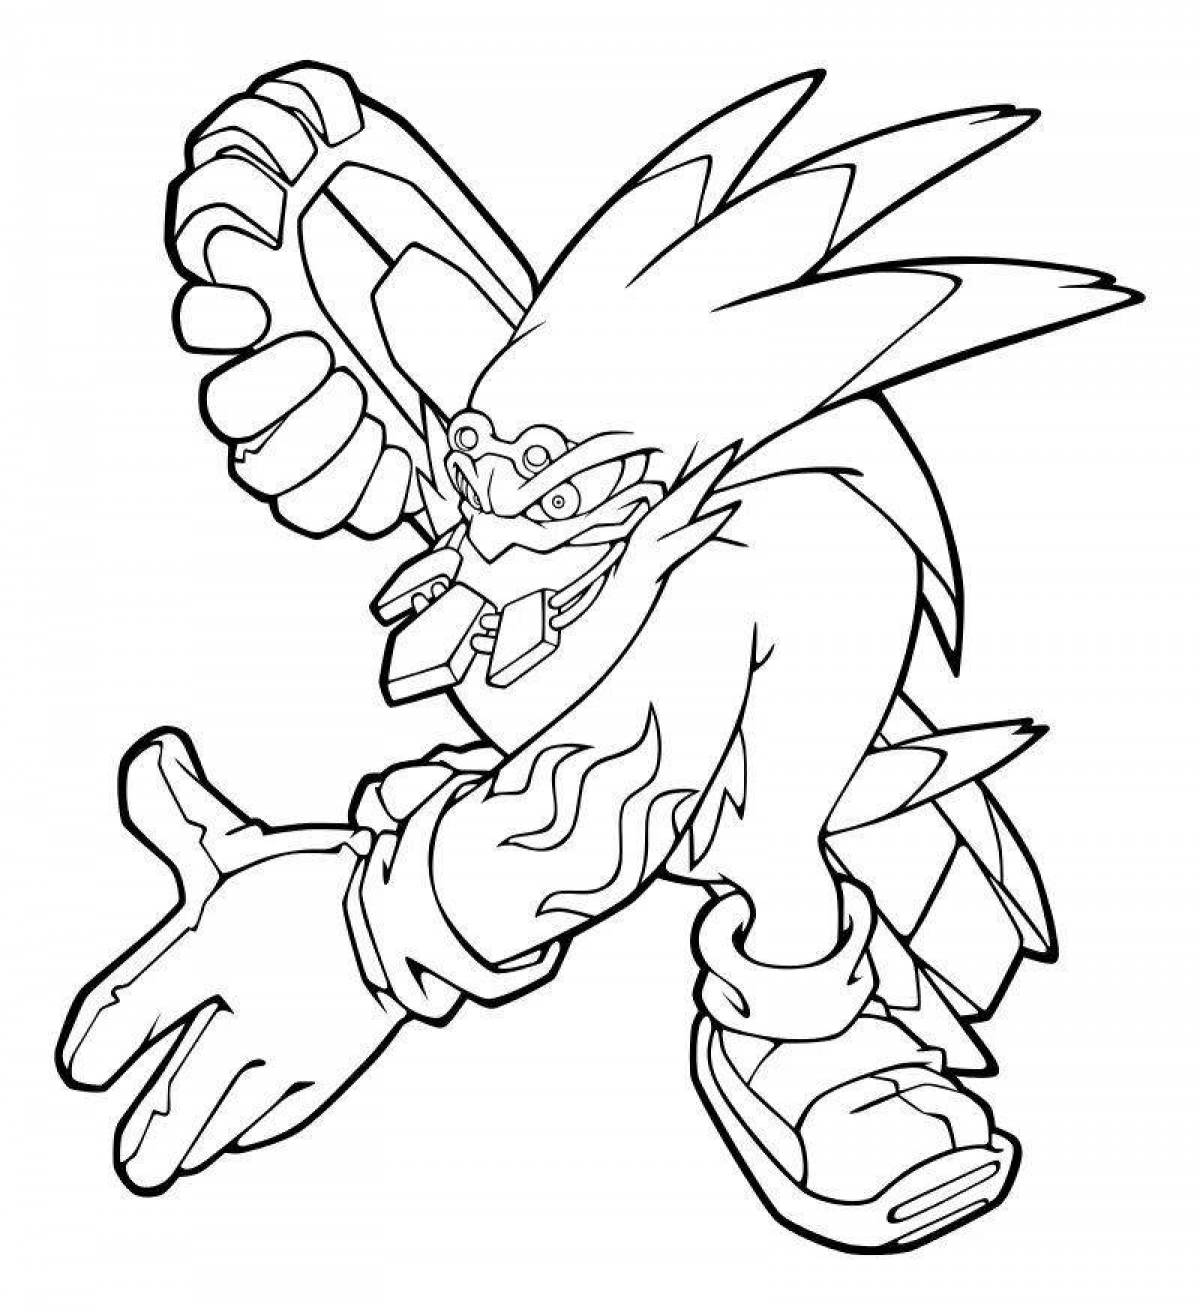 Sonic werewolf style coloring book